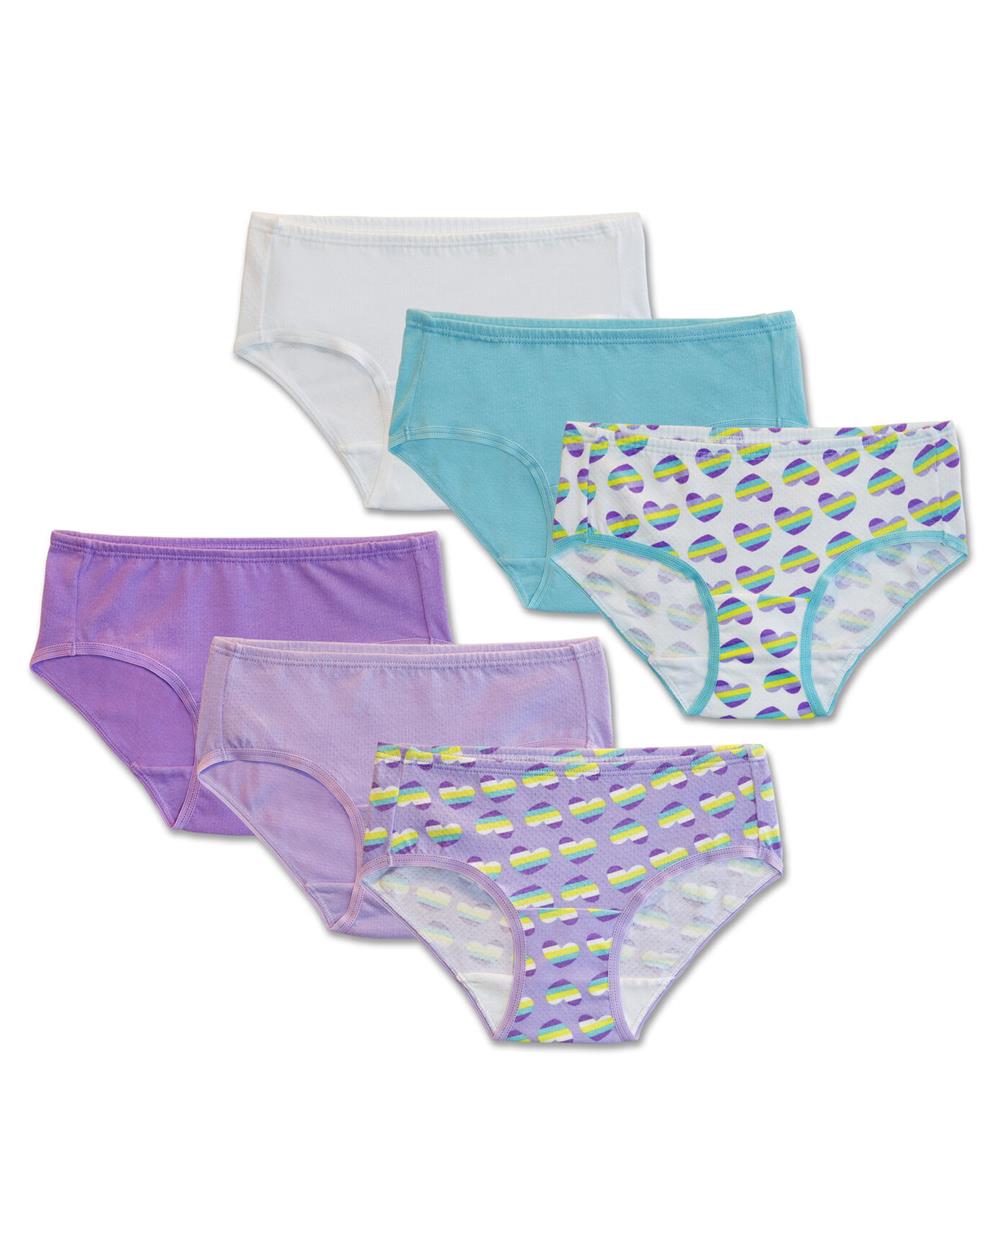 Fruit of the Loom Girls 6 Pack Cotton Mesh Hipsters